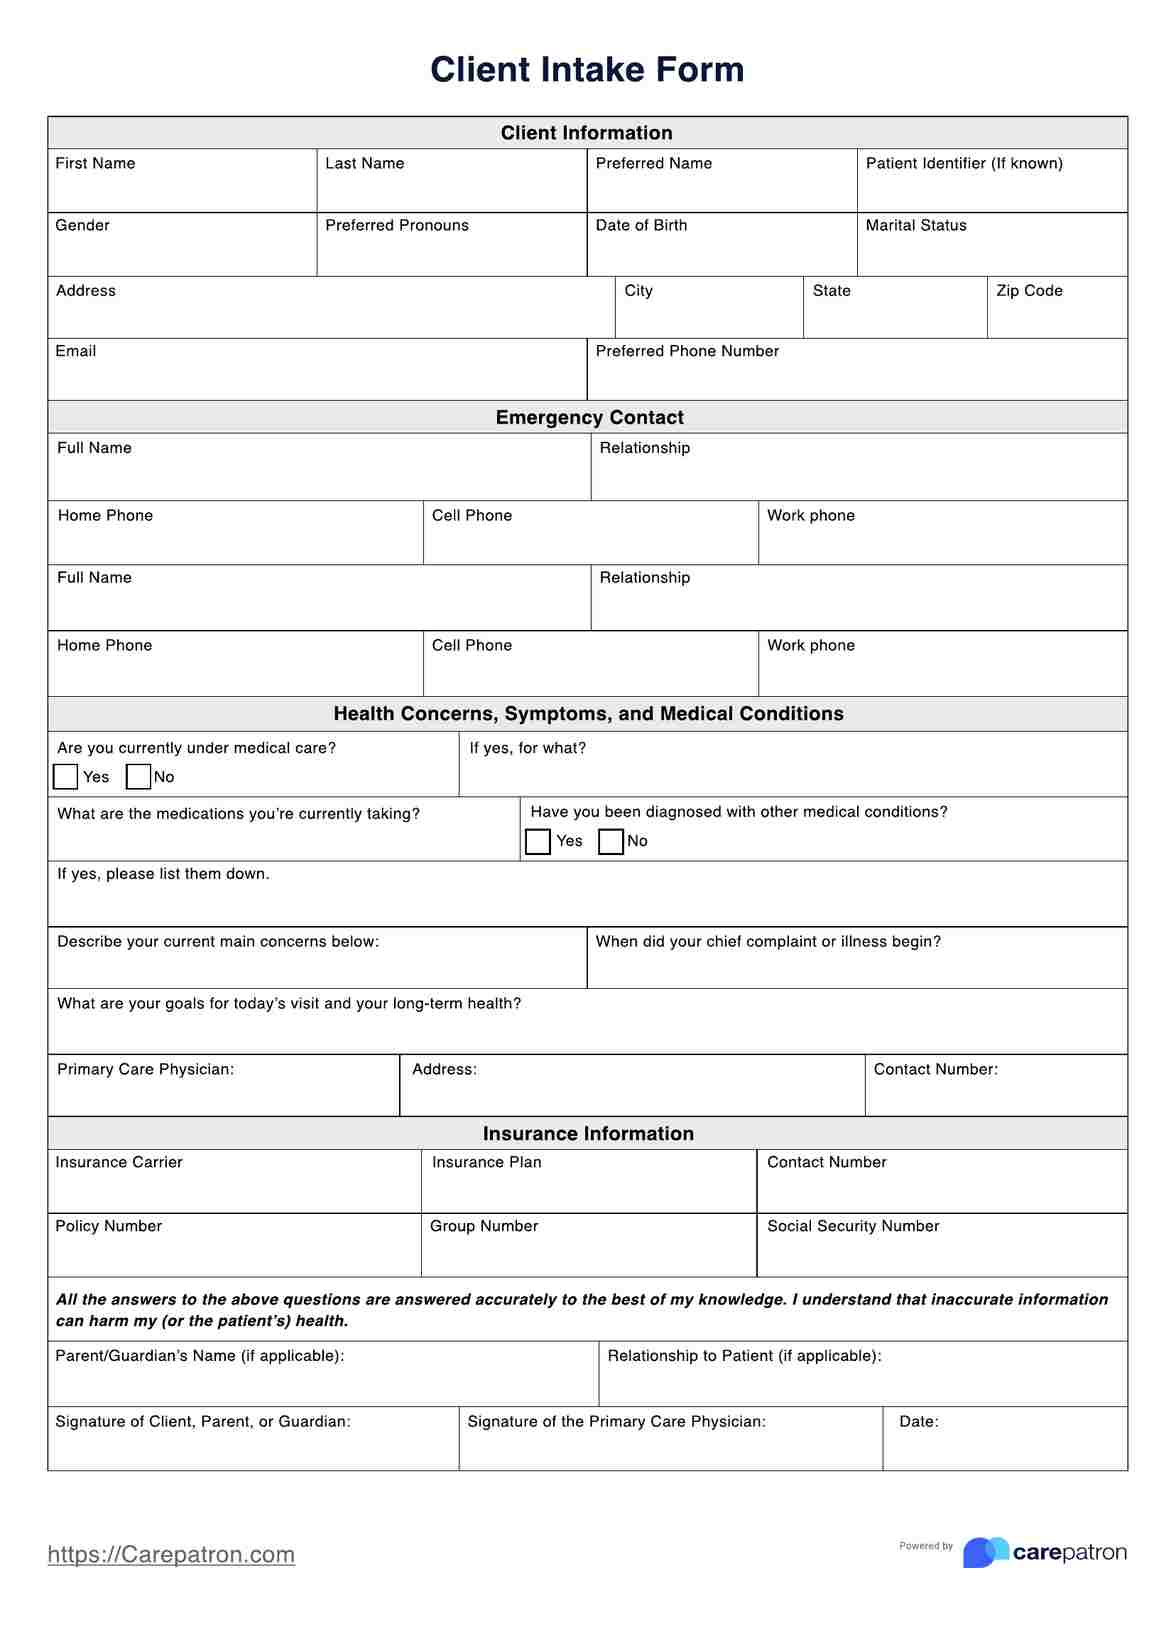 Client Intake Form Template PDF Example